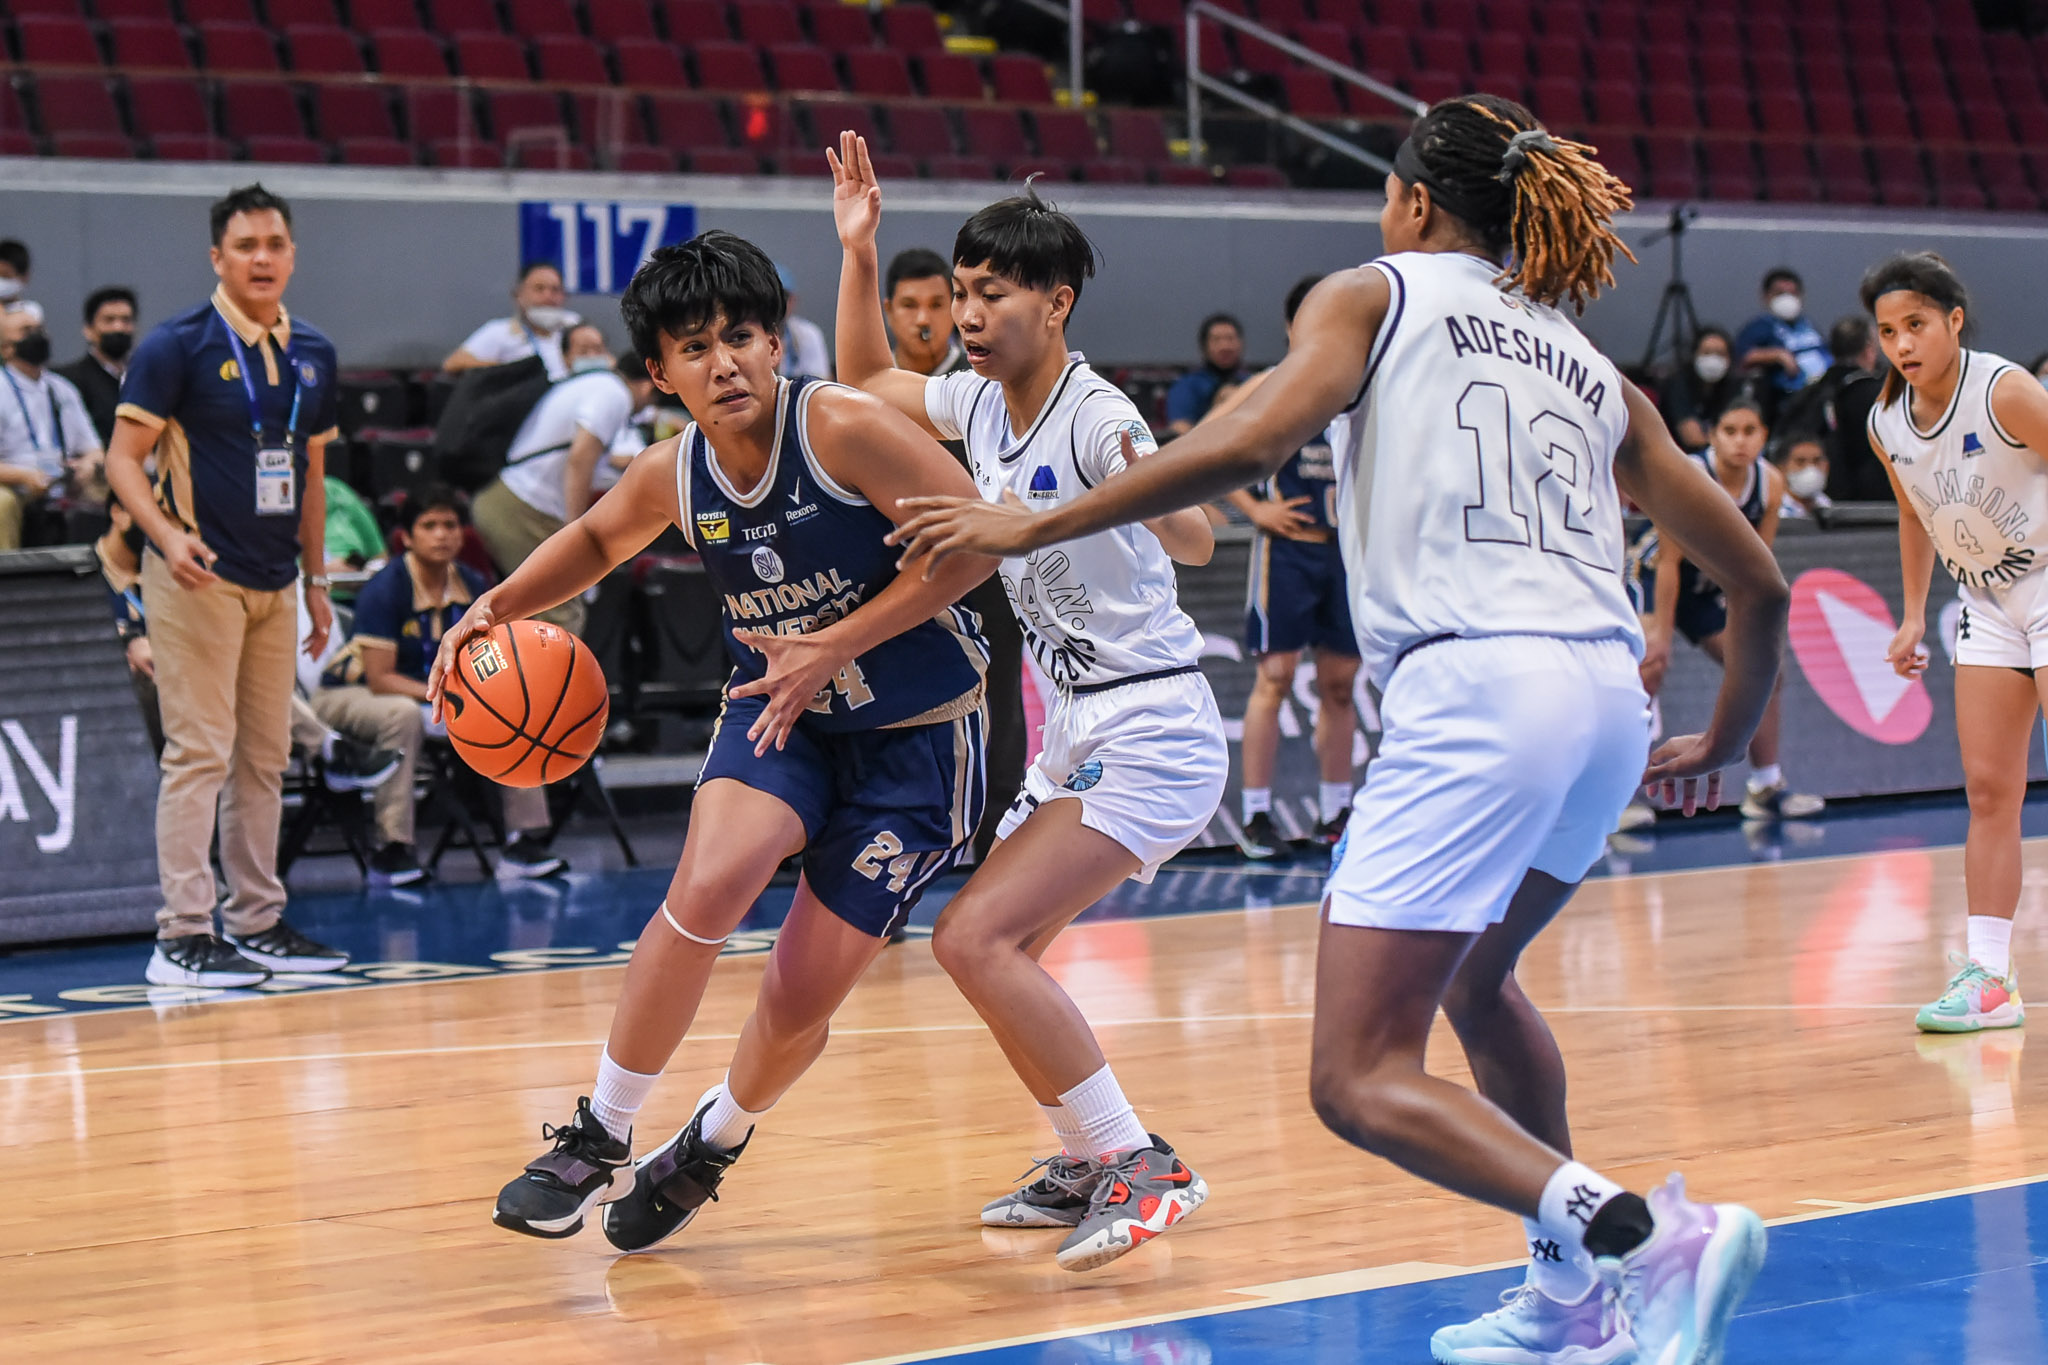 Tin Cayabyab (left) and the Lady Bulldogs kept their foot on the pedal all game long against the Lady Falcons. —UAAP MEDIA.